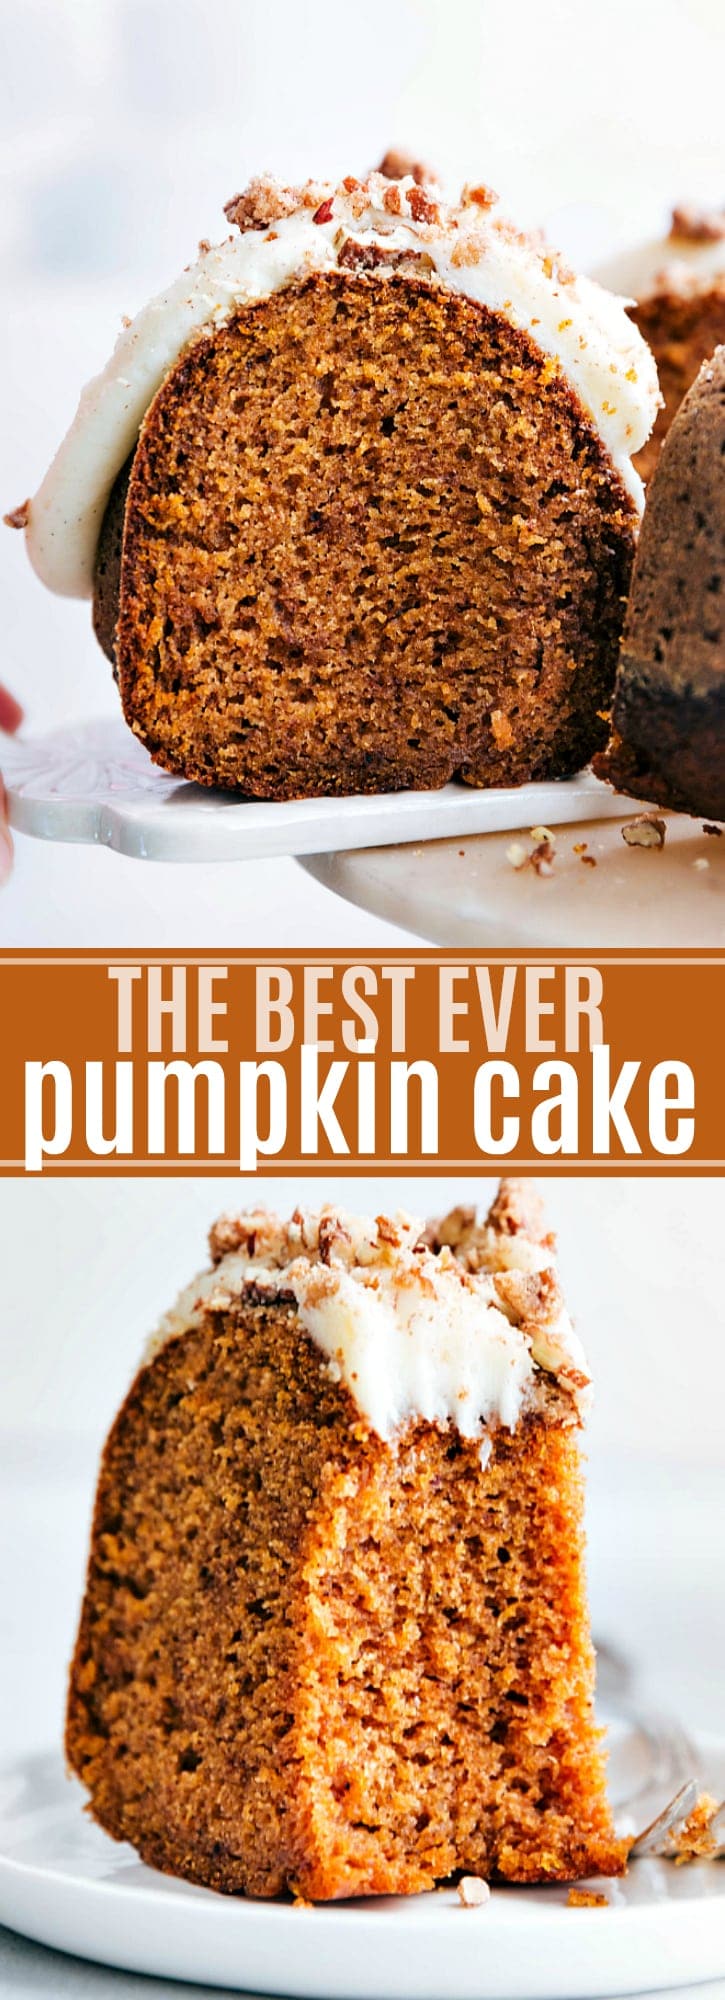 The BEST ever moist and perfectly spiced pumpkin cake with a luscious cream cheese frosting via chelseasmessyapron.com #bundt #cake #pumpkin #cream #cheese #frosting #best #ever #dessert #fall #thanksgiving #bestever #pecan #nut #easy #failproof #tested #healthy #healthier #tried #true